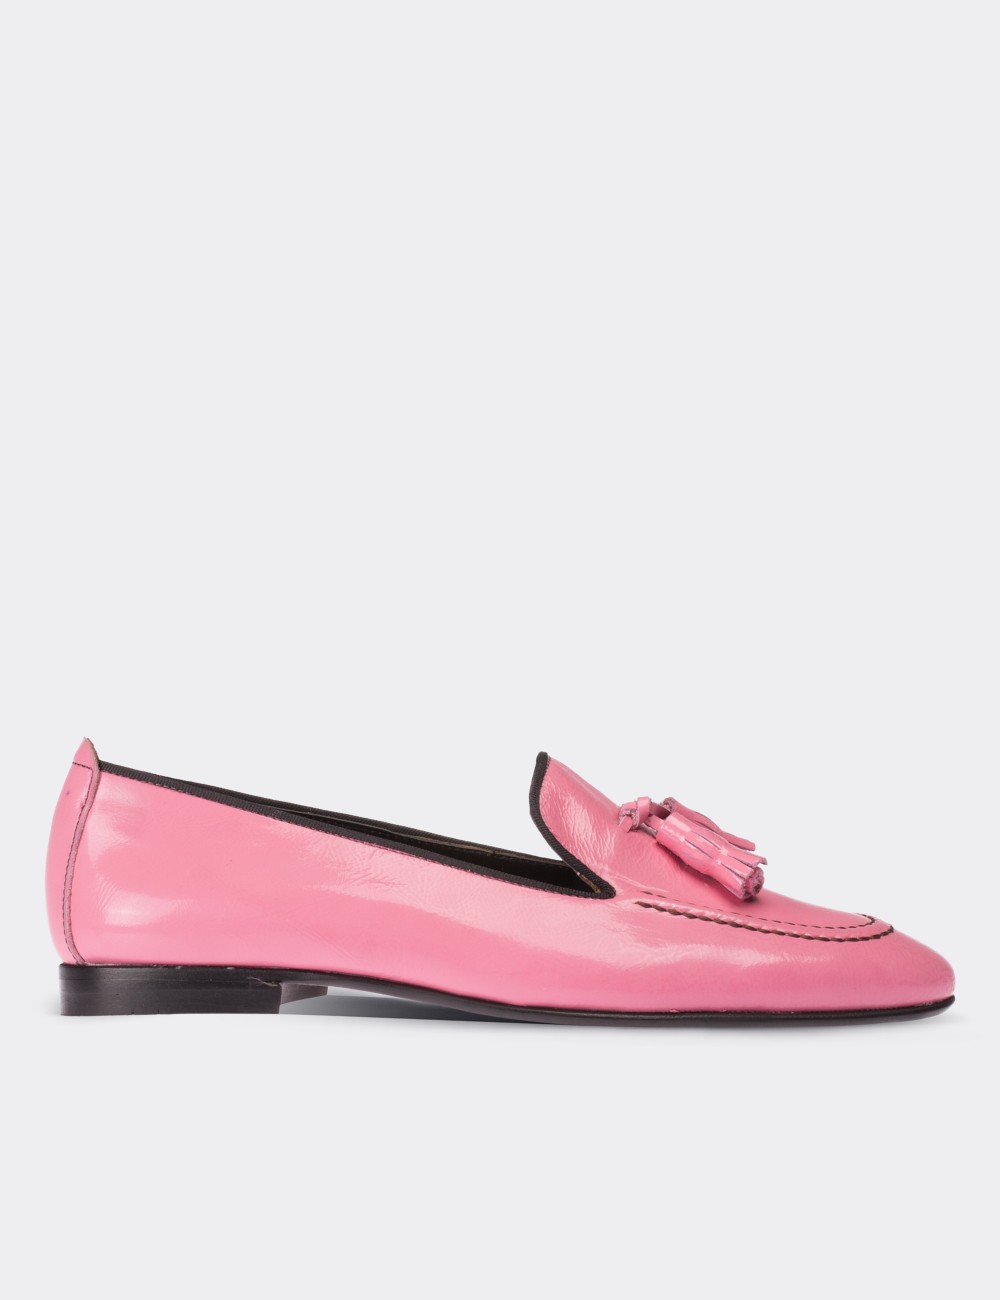 Pink Patent Leather Loafers Shoes - 01619ZPMBM01